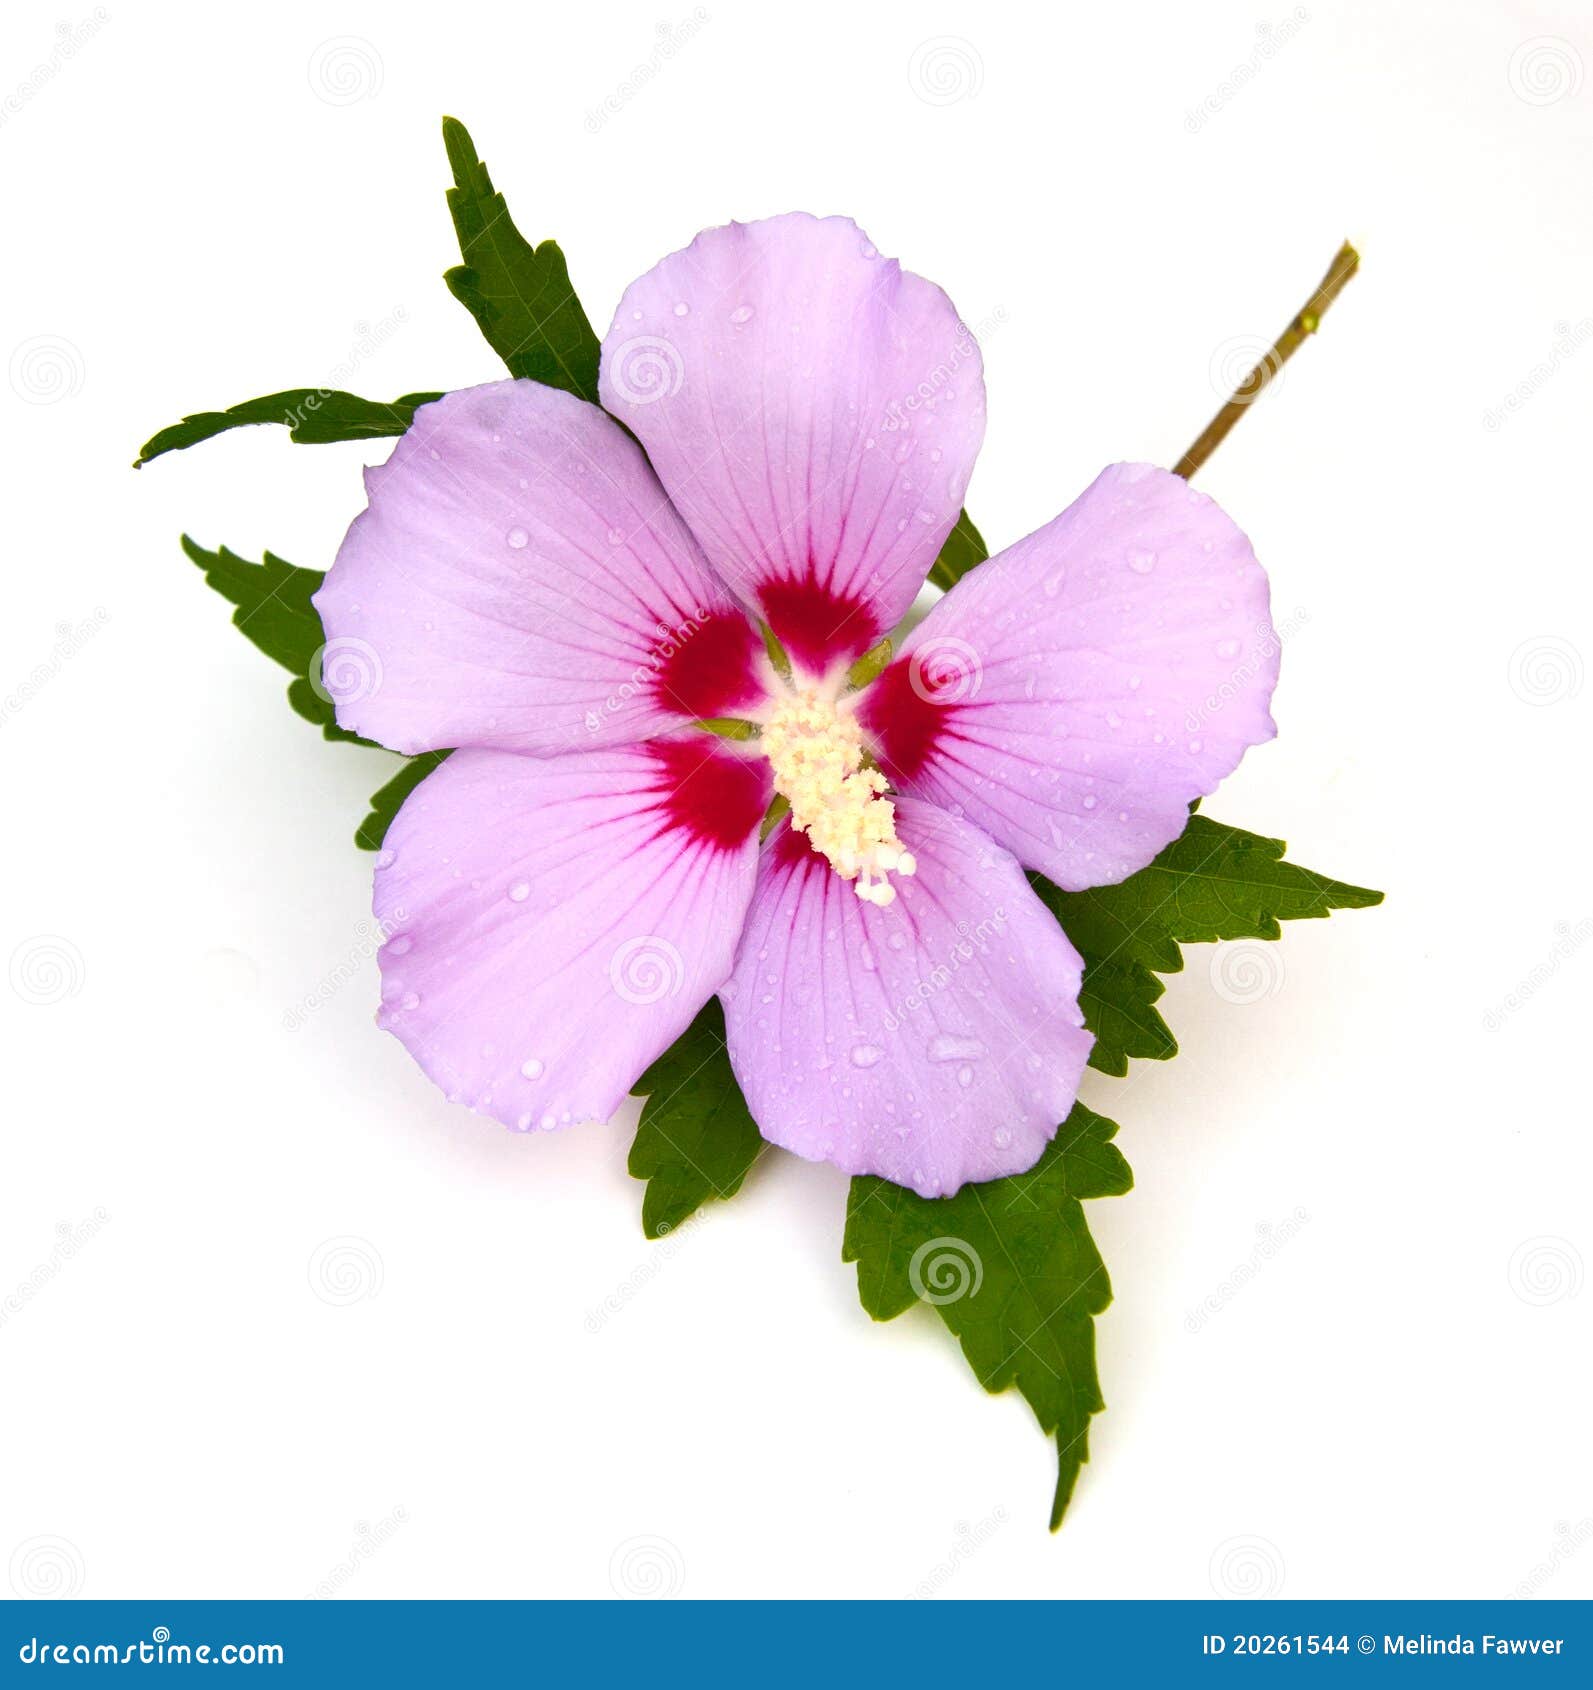 clipart rose of sharon - photo #9